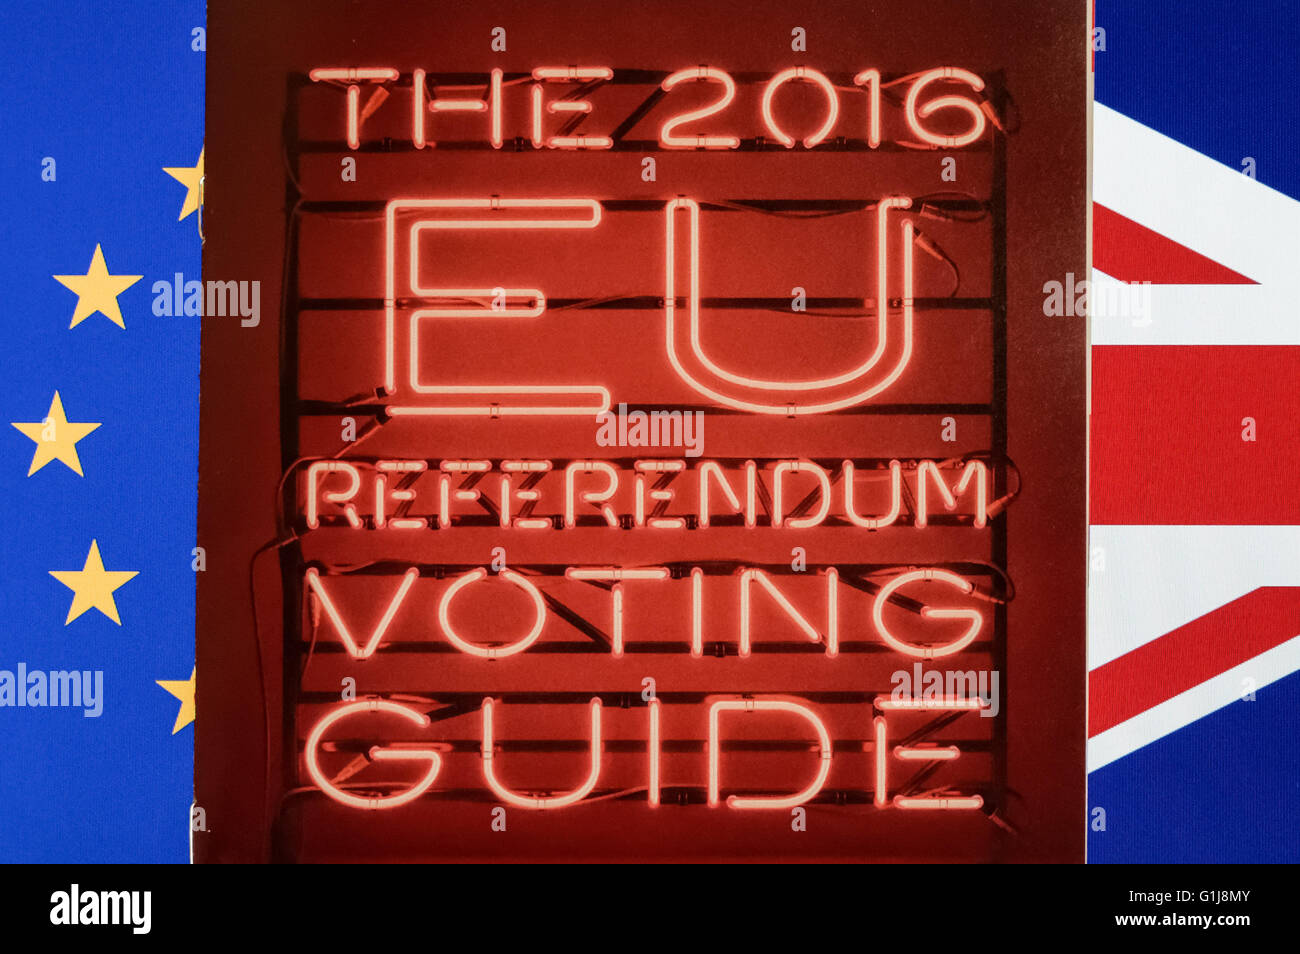 London, UK. 16th May, 2016. An impartial voting guide for the EU referendum will drop through the letterboxes of 28 million households across the UK from 16 May. The eight-page booklet gives advice on who can vote, how to register and a page on each of the lead campaigns. It is part of a £6.4m awareness campaign organised by the Electoral Commission, which also includes a TV advert. Stock Photo